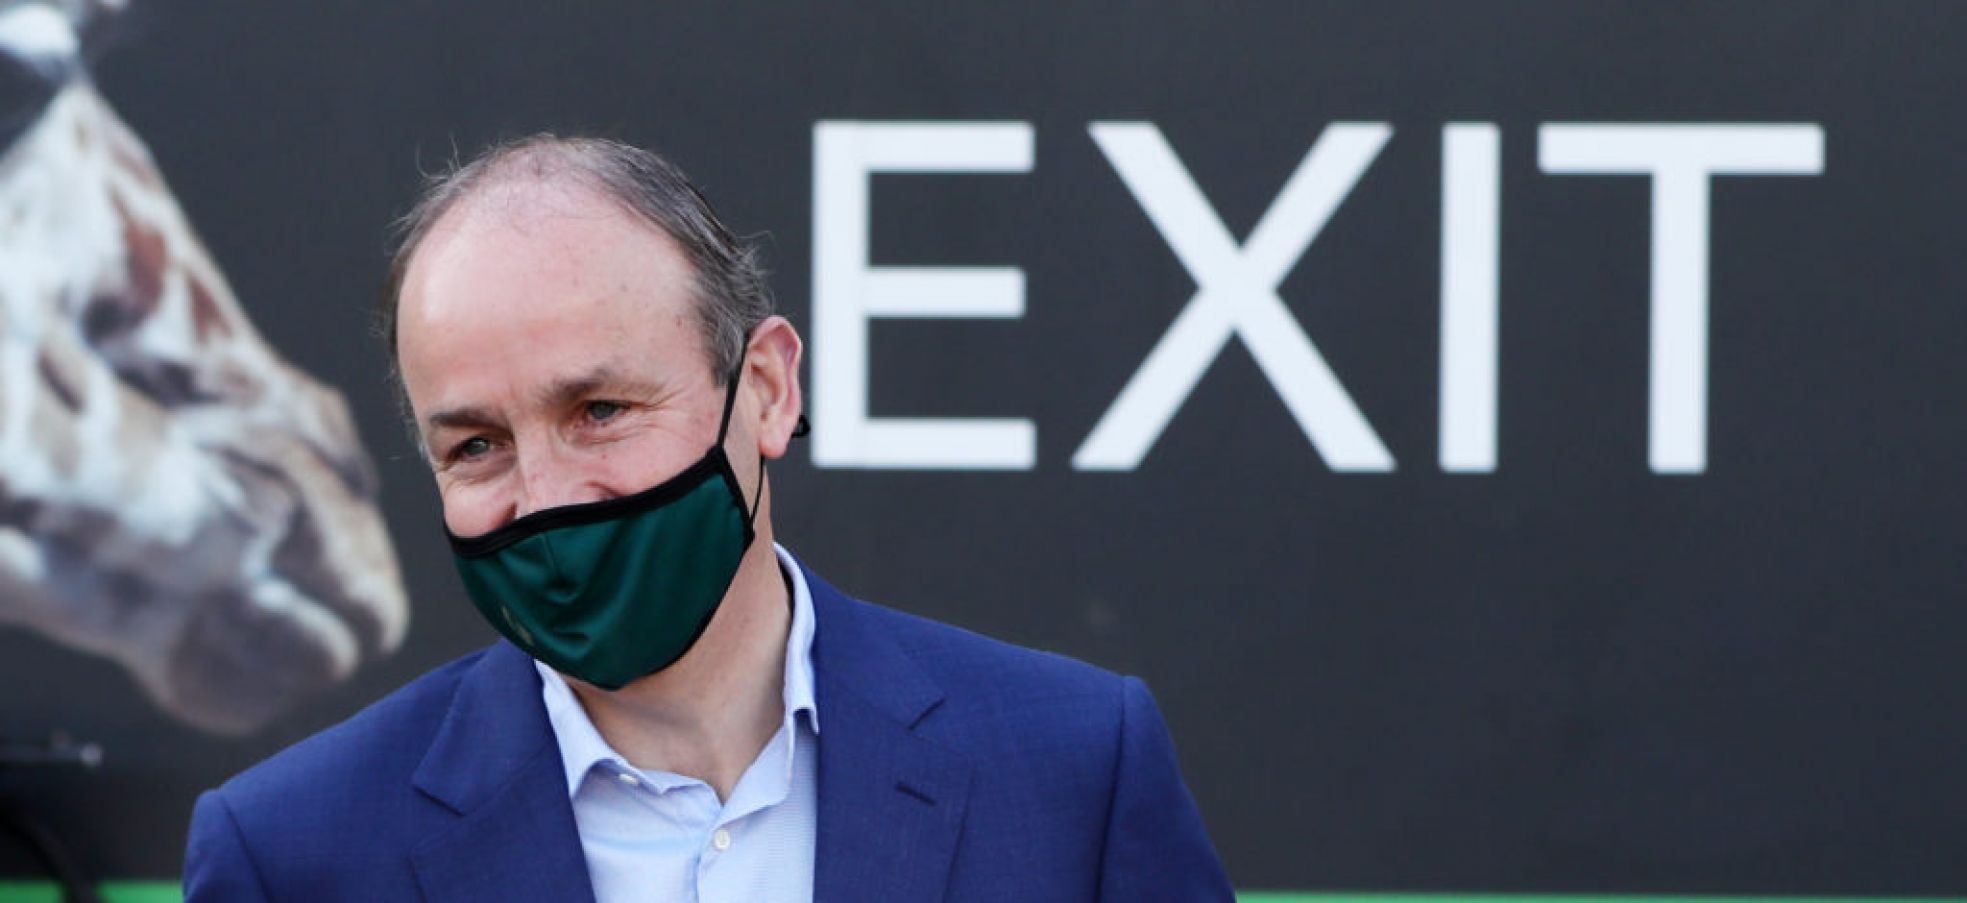 Taoiseach Micheál Martin During A Visit To A Newly Reopened Dublin Zoo On April 26Th. The State Took Its Next Gradual Steps Out Of Lockdown With The Reopening Of Visitor Attractions And Outdoor Sports Facilities. Photo: Pa